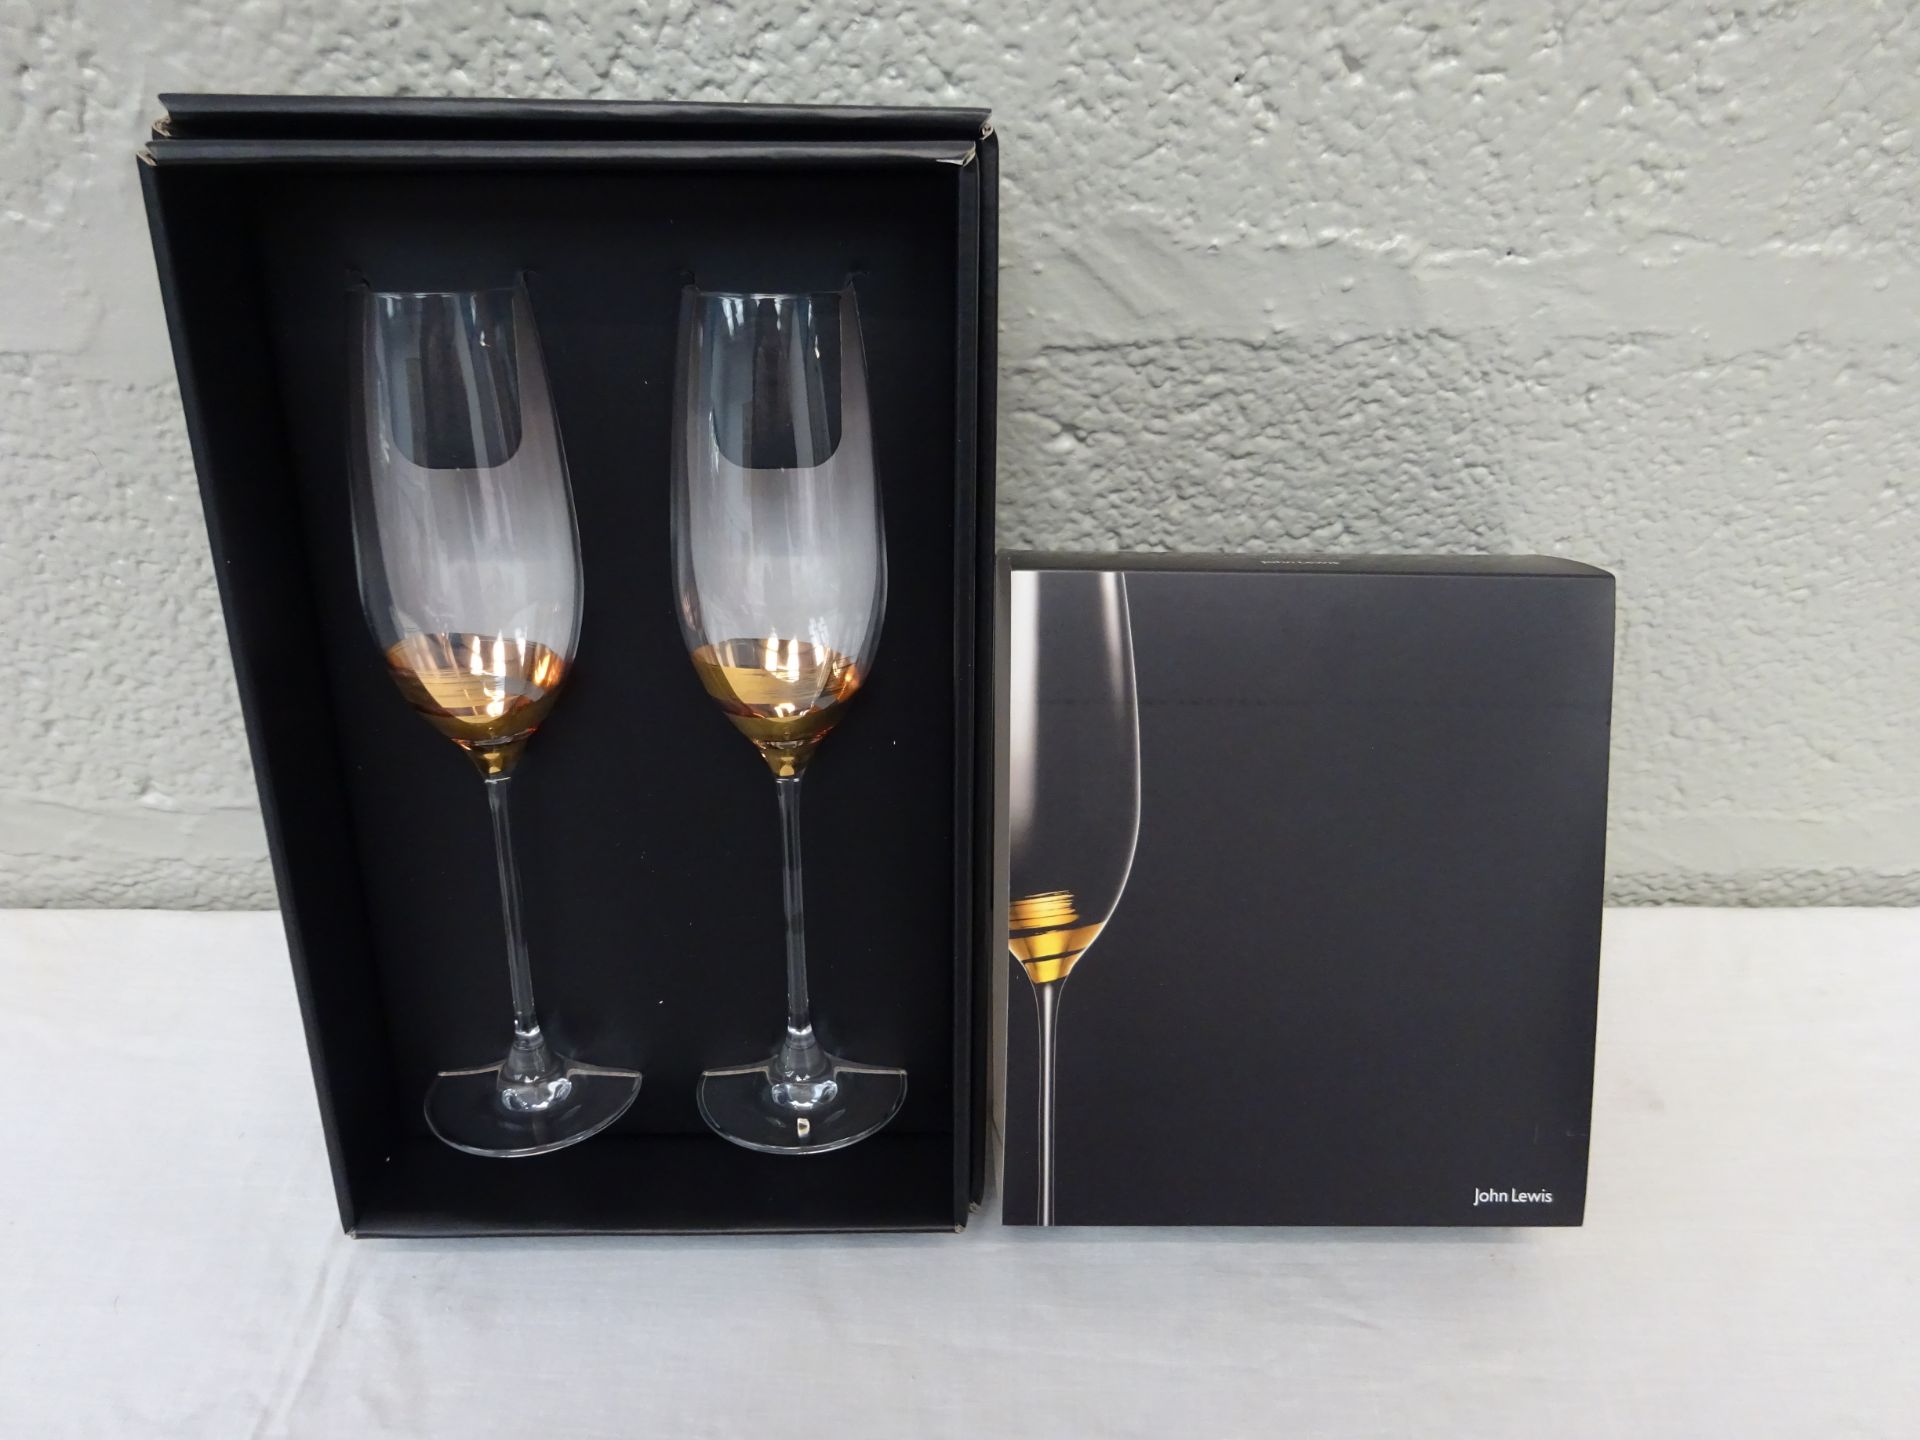 Brand New Set of 2 John Lewis Crystal Glass Champagne Flutes With Gold Detailing.